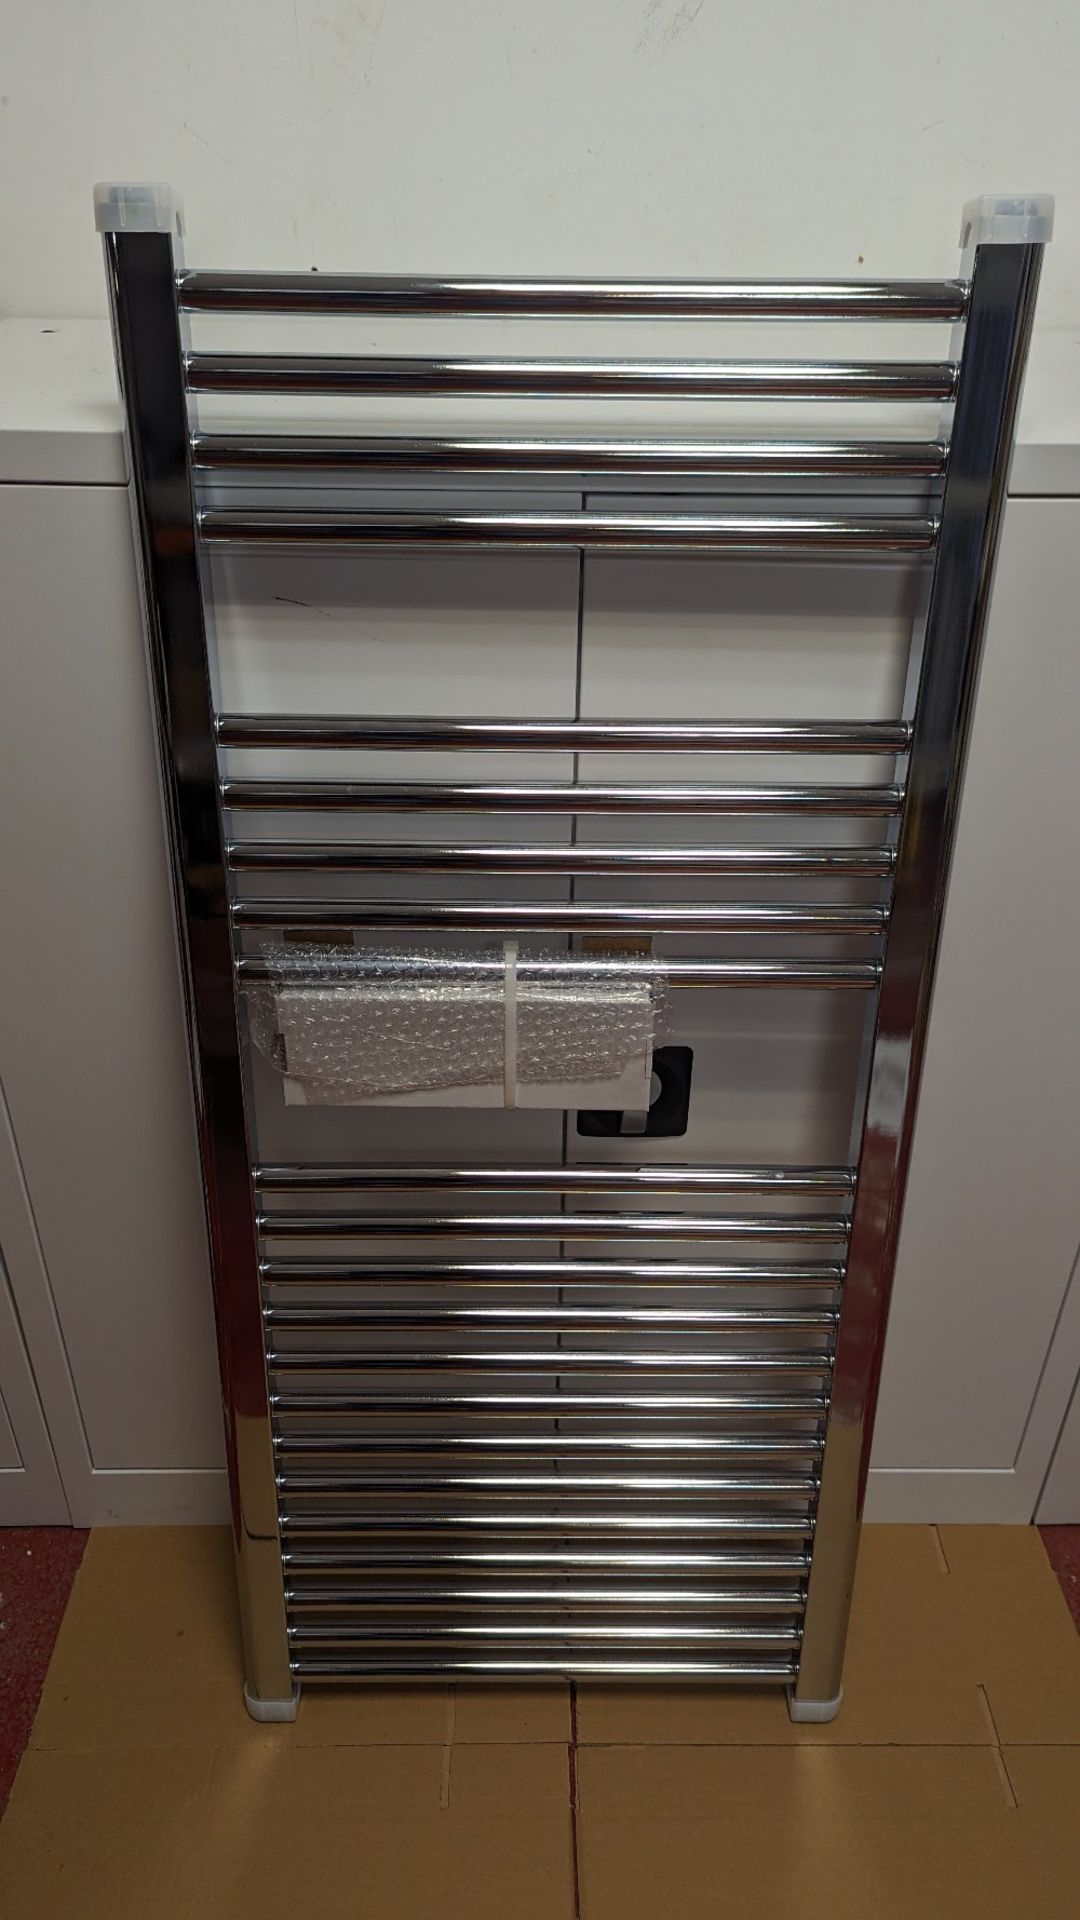 (3) Highlife 'Maree' Towel Warmers - Image 3 of 3